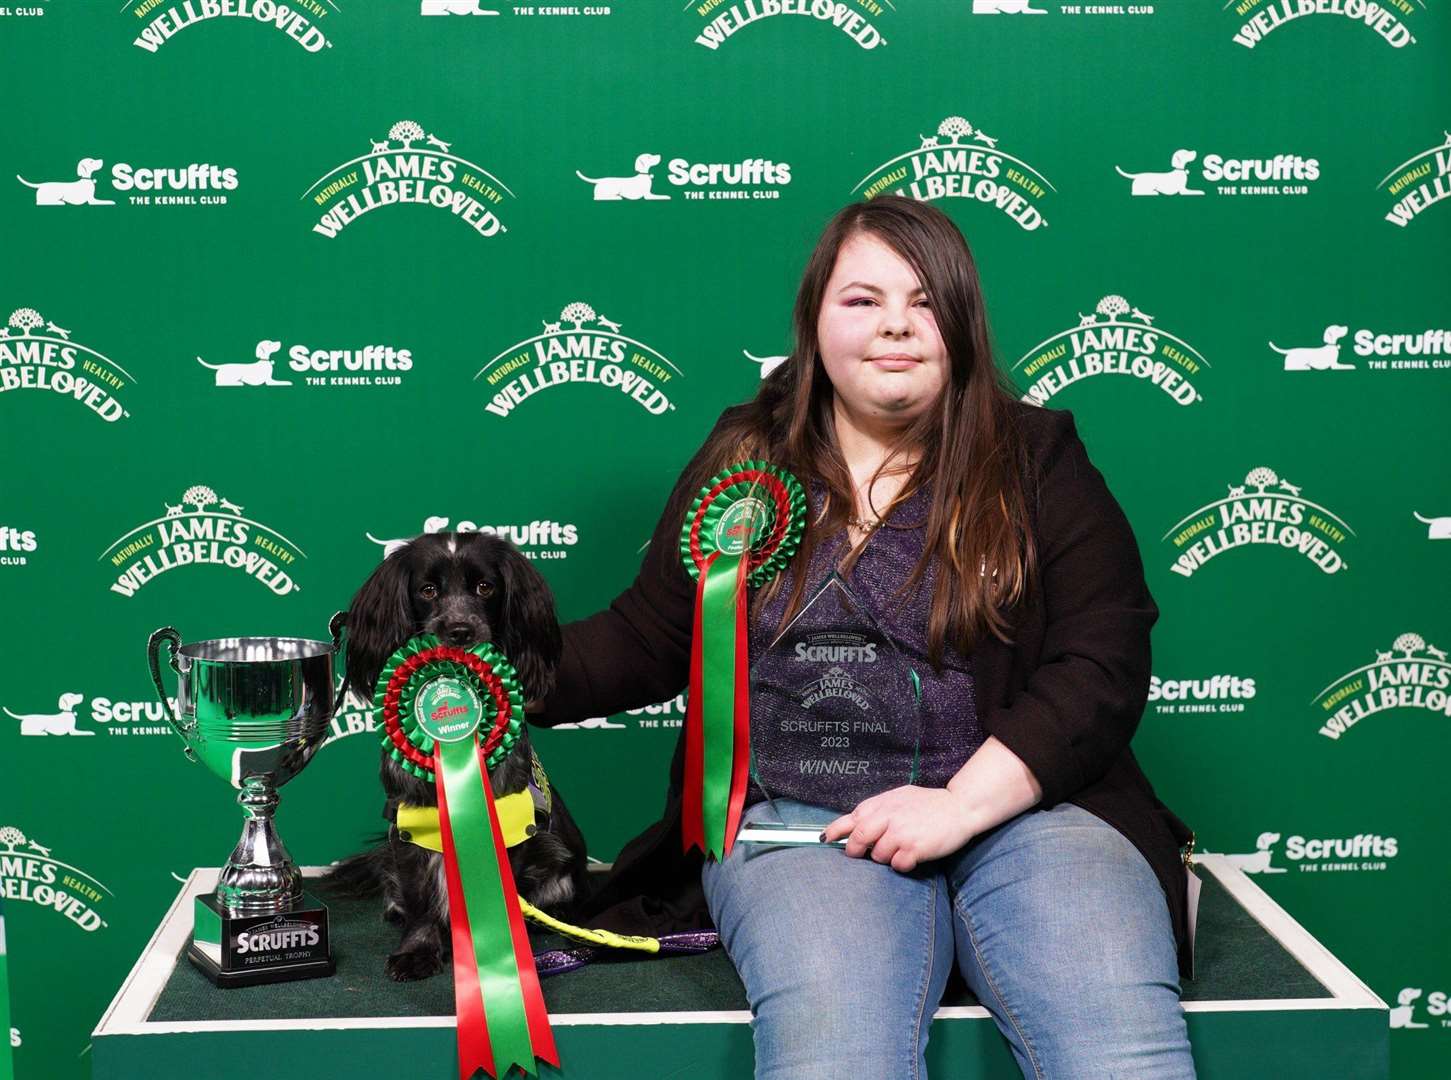 The Scruffts Good Citizen Dog Scheme winner, Delilah with her owner Francesca Cairns. Picture: BeatMedia/The Kennel Club